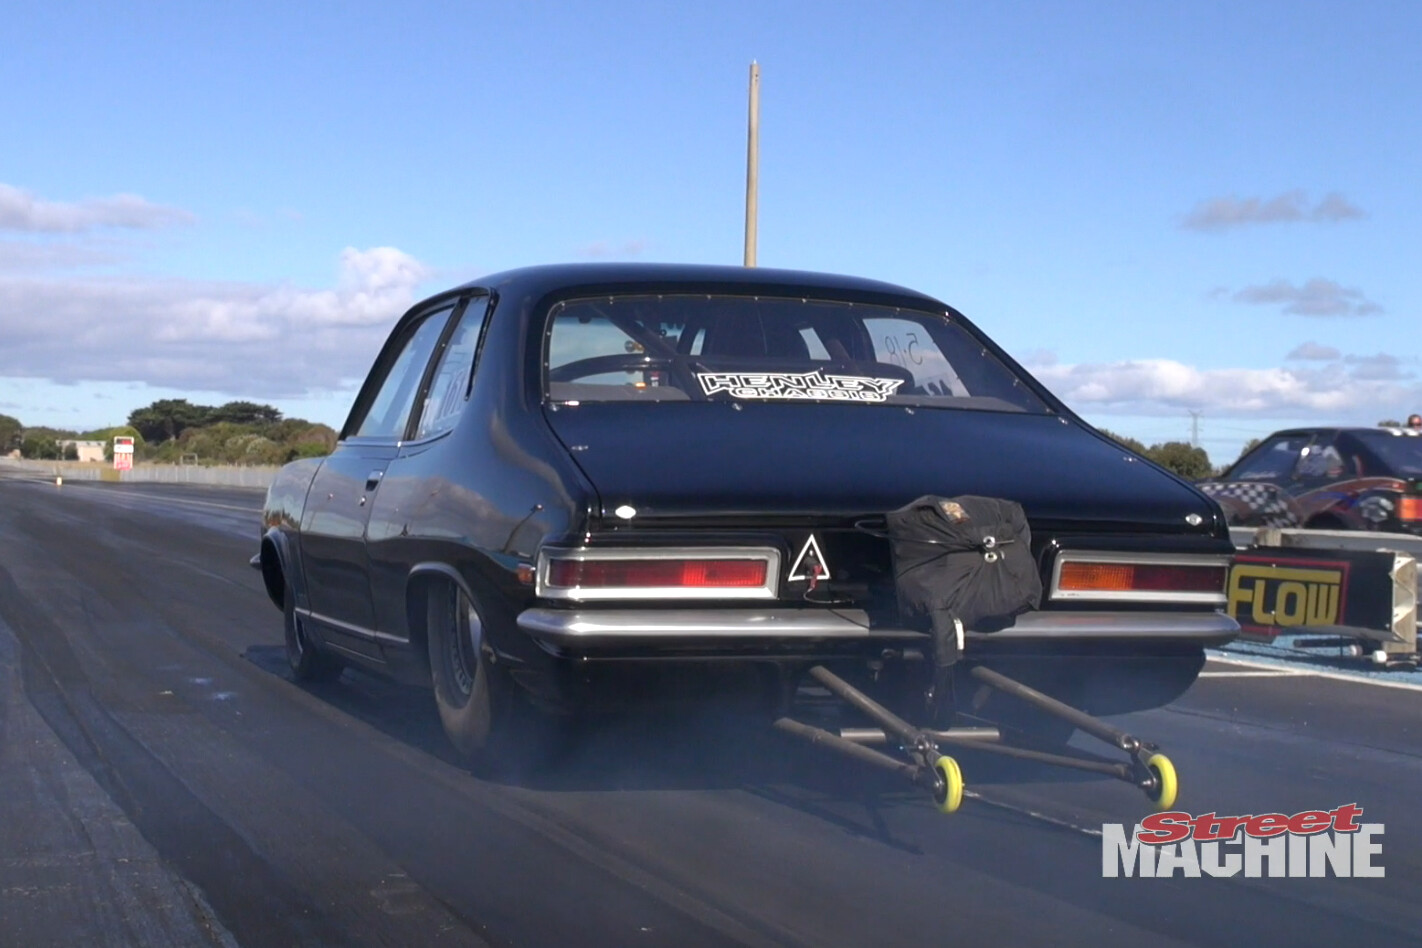 VIDEO: GORGEOUS HENLEY CHASSIS TORANA DRAG CAR